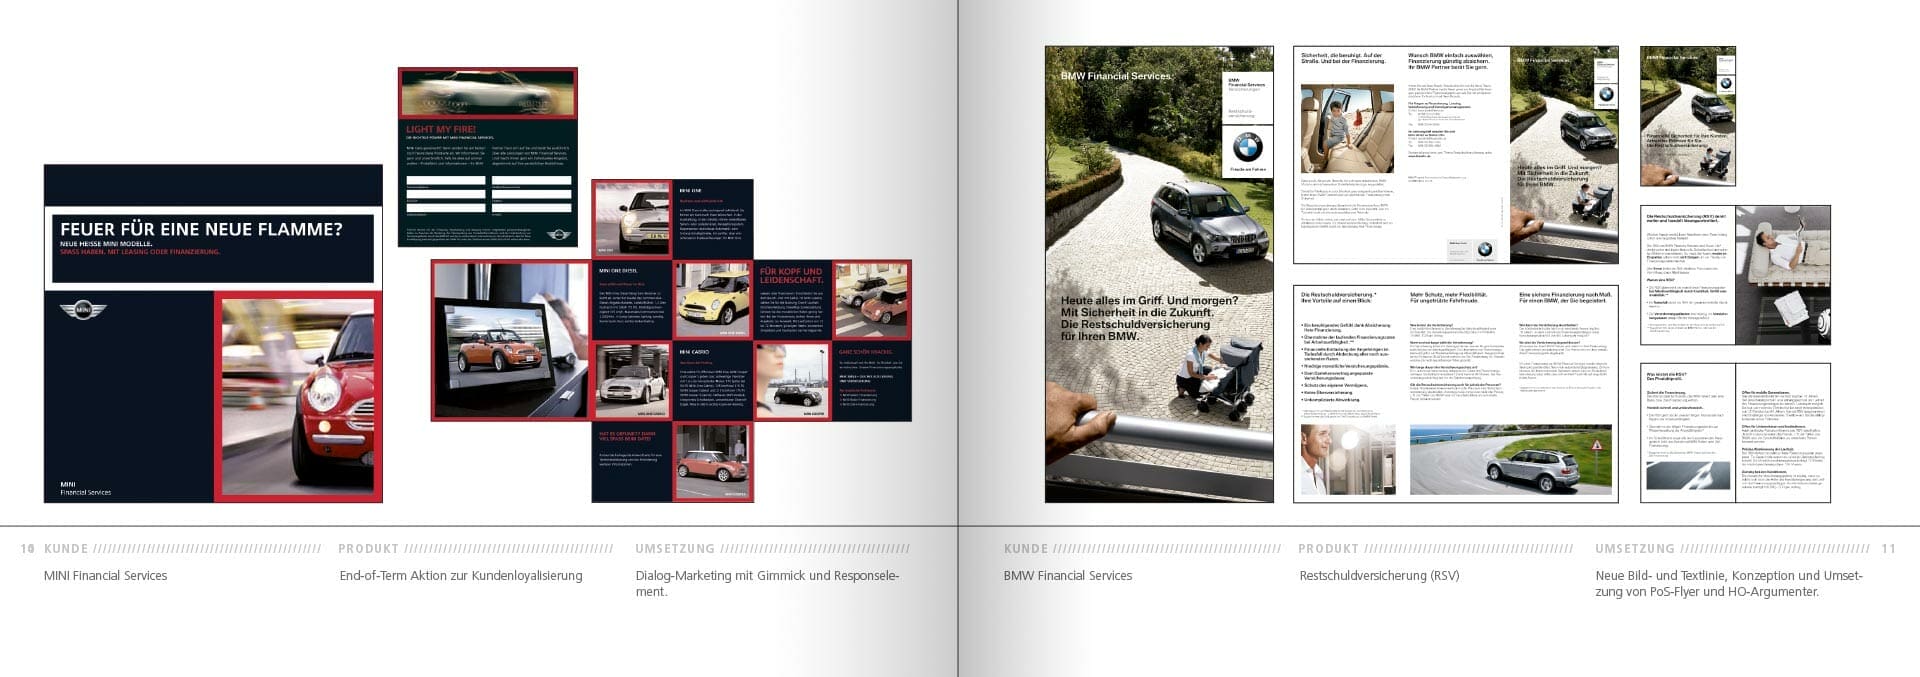 BMW Group Works 2001-2009 Booklet 10-11